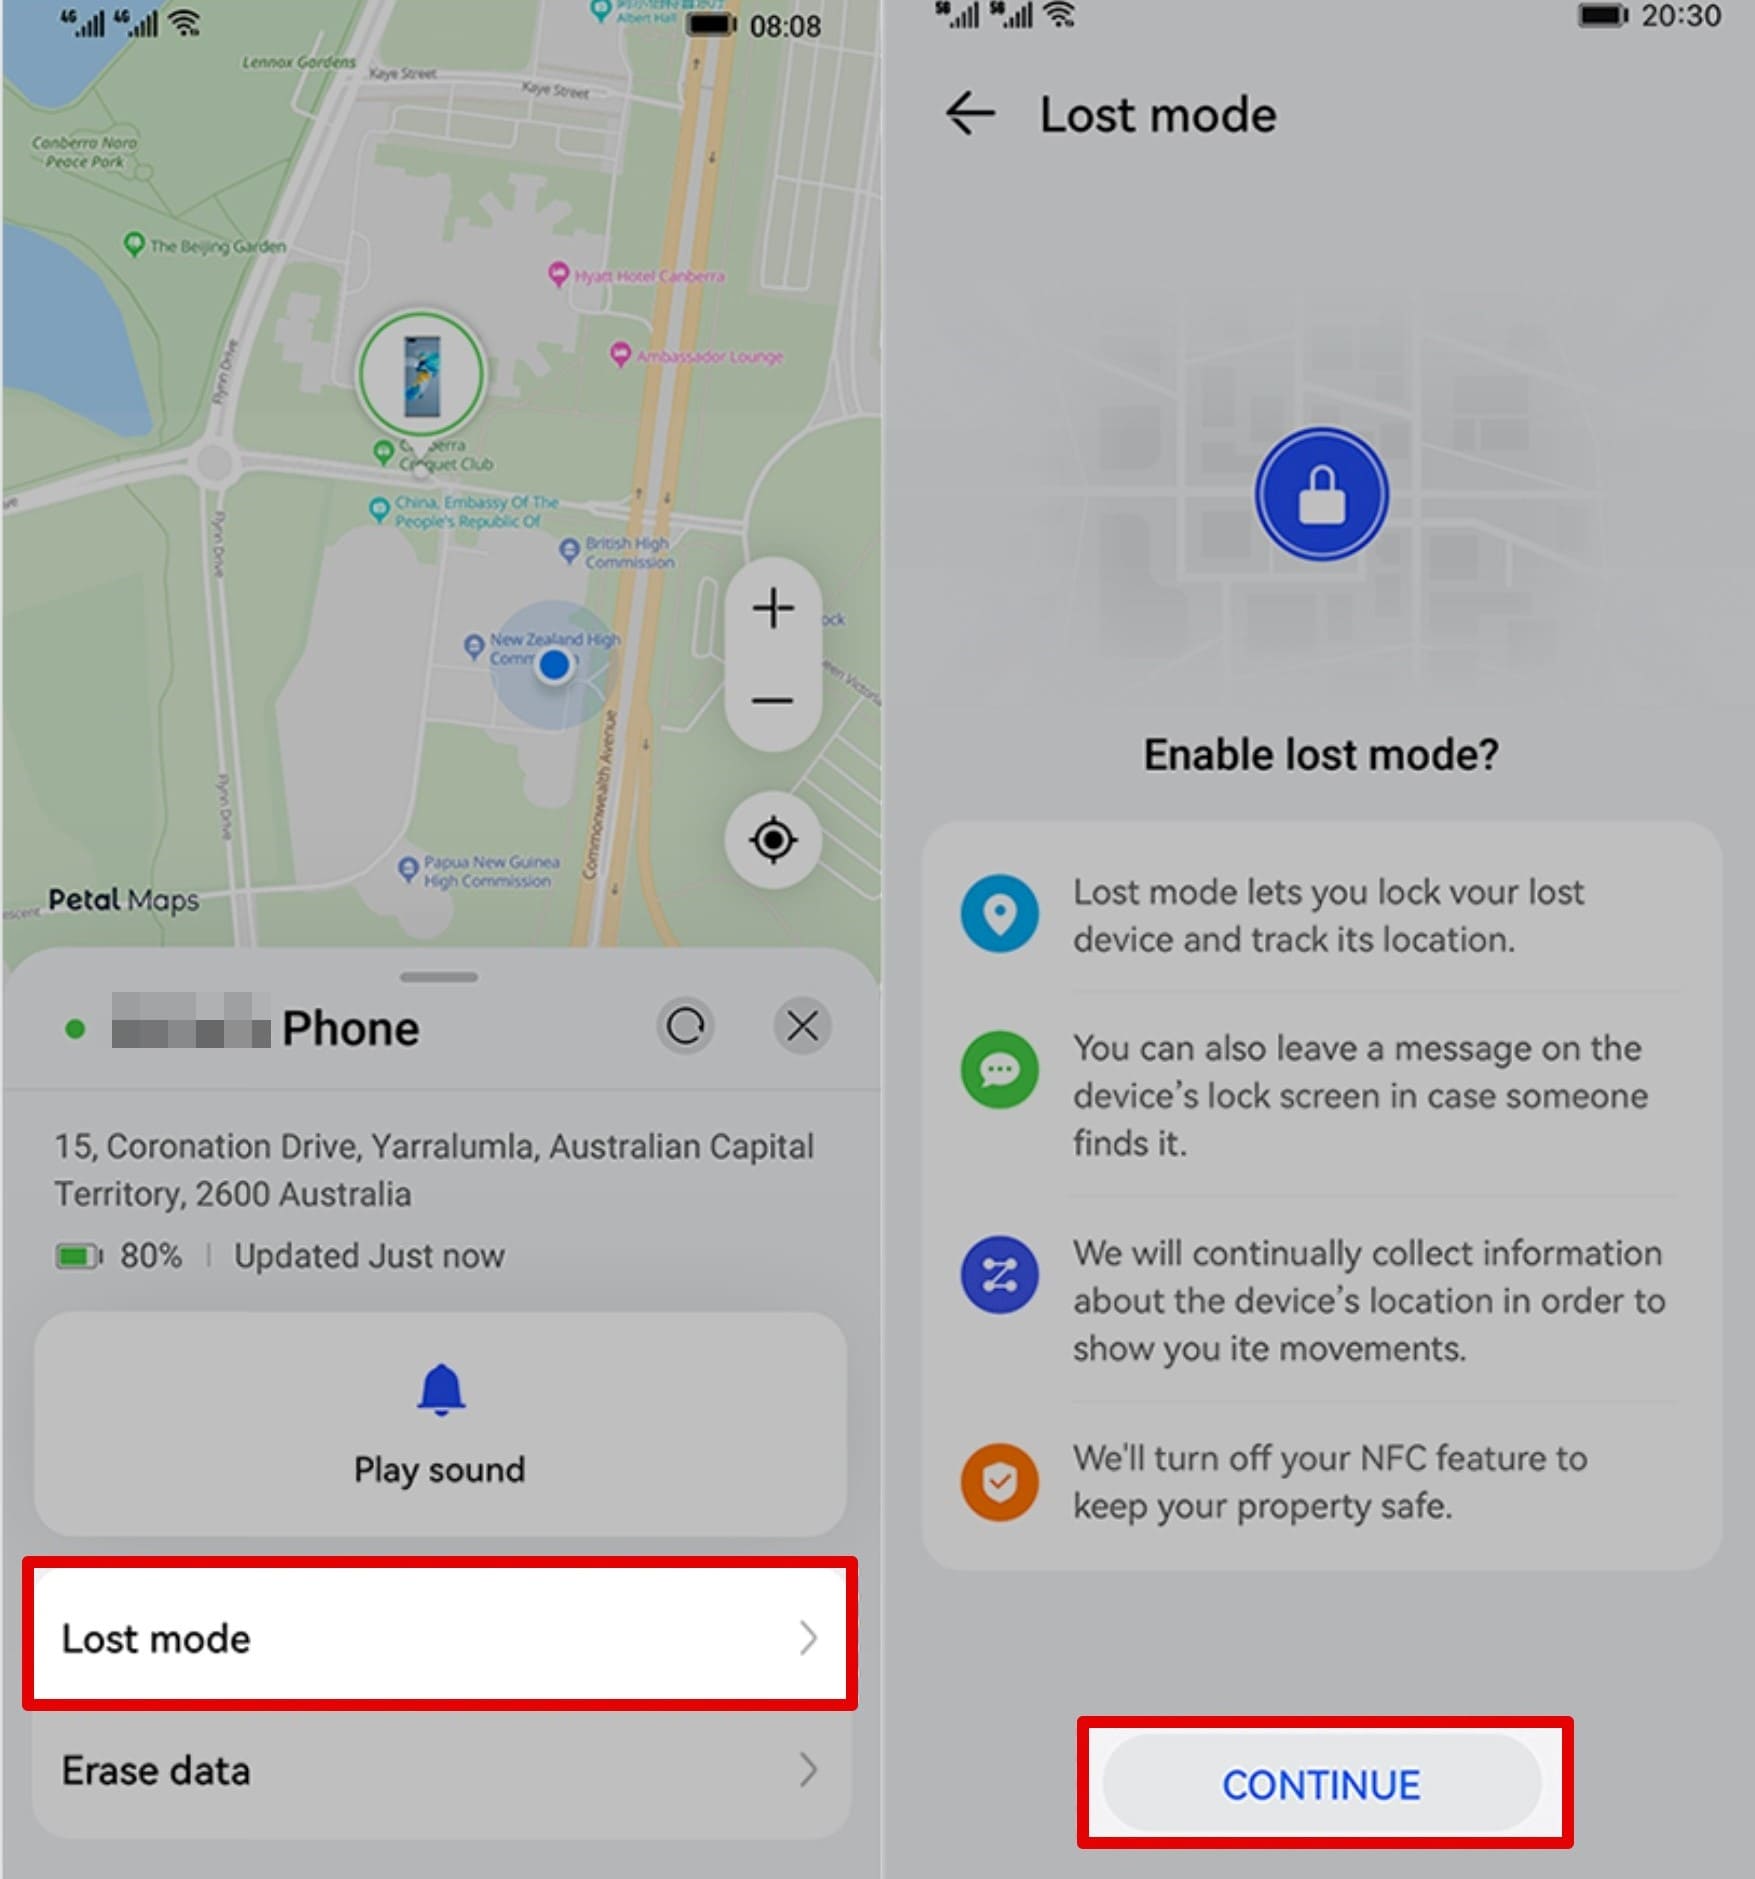 An image of the Lock device function for Huawei phone on Huawei cloud